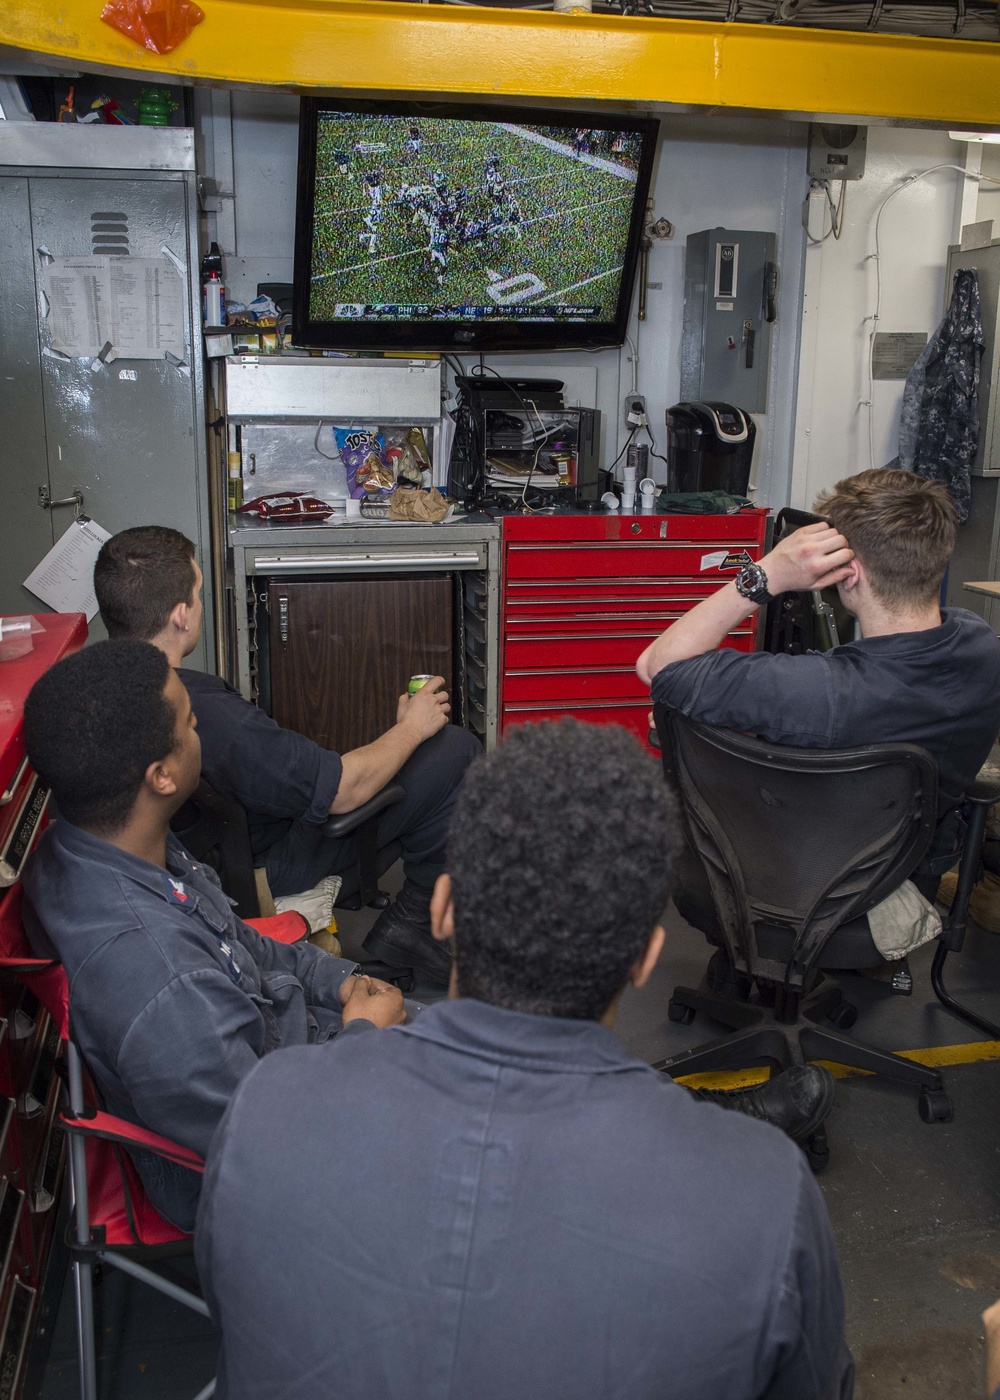 Sailors and Marines aboard USS Bonhomme Richard (LHD 6) watch Superbowl LII